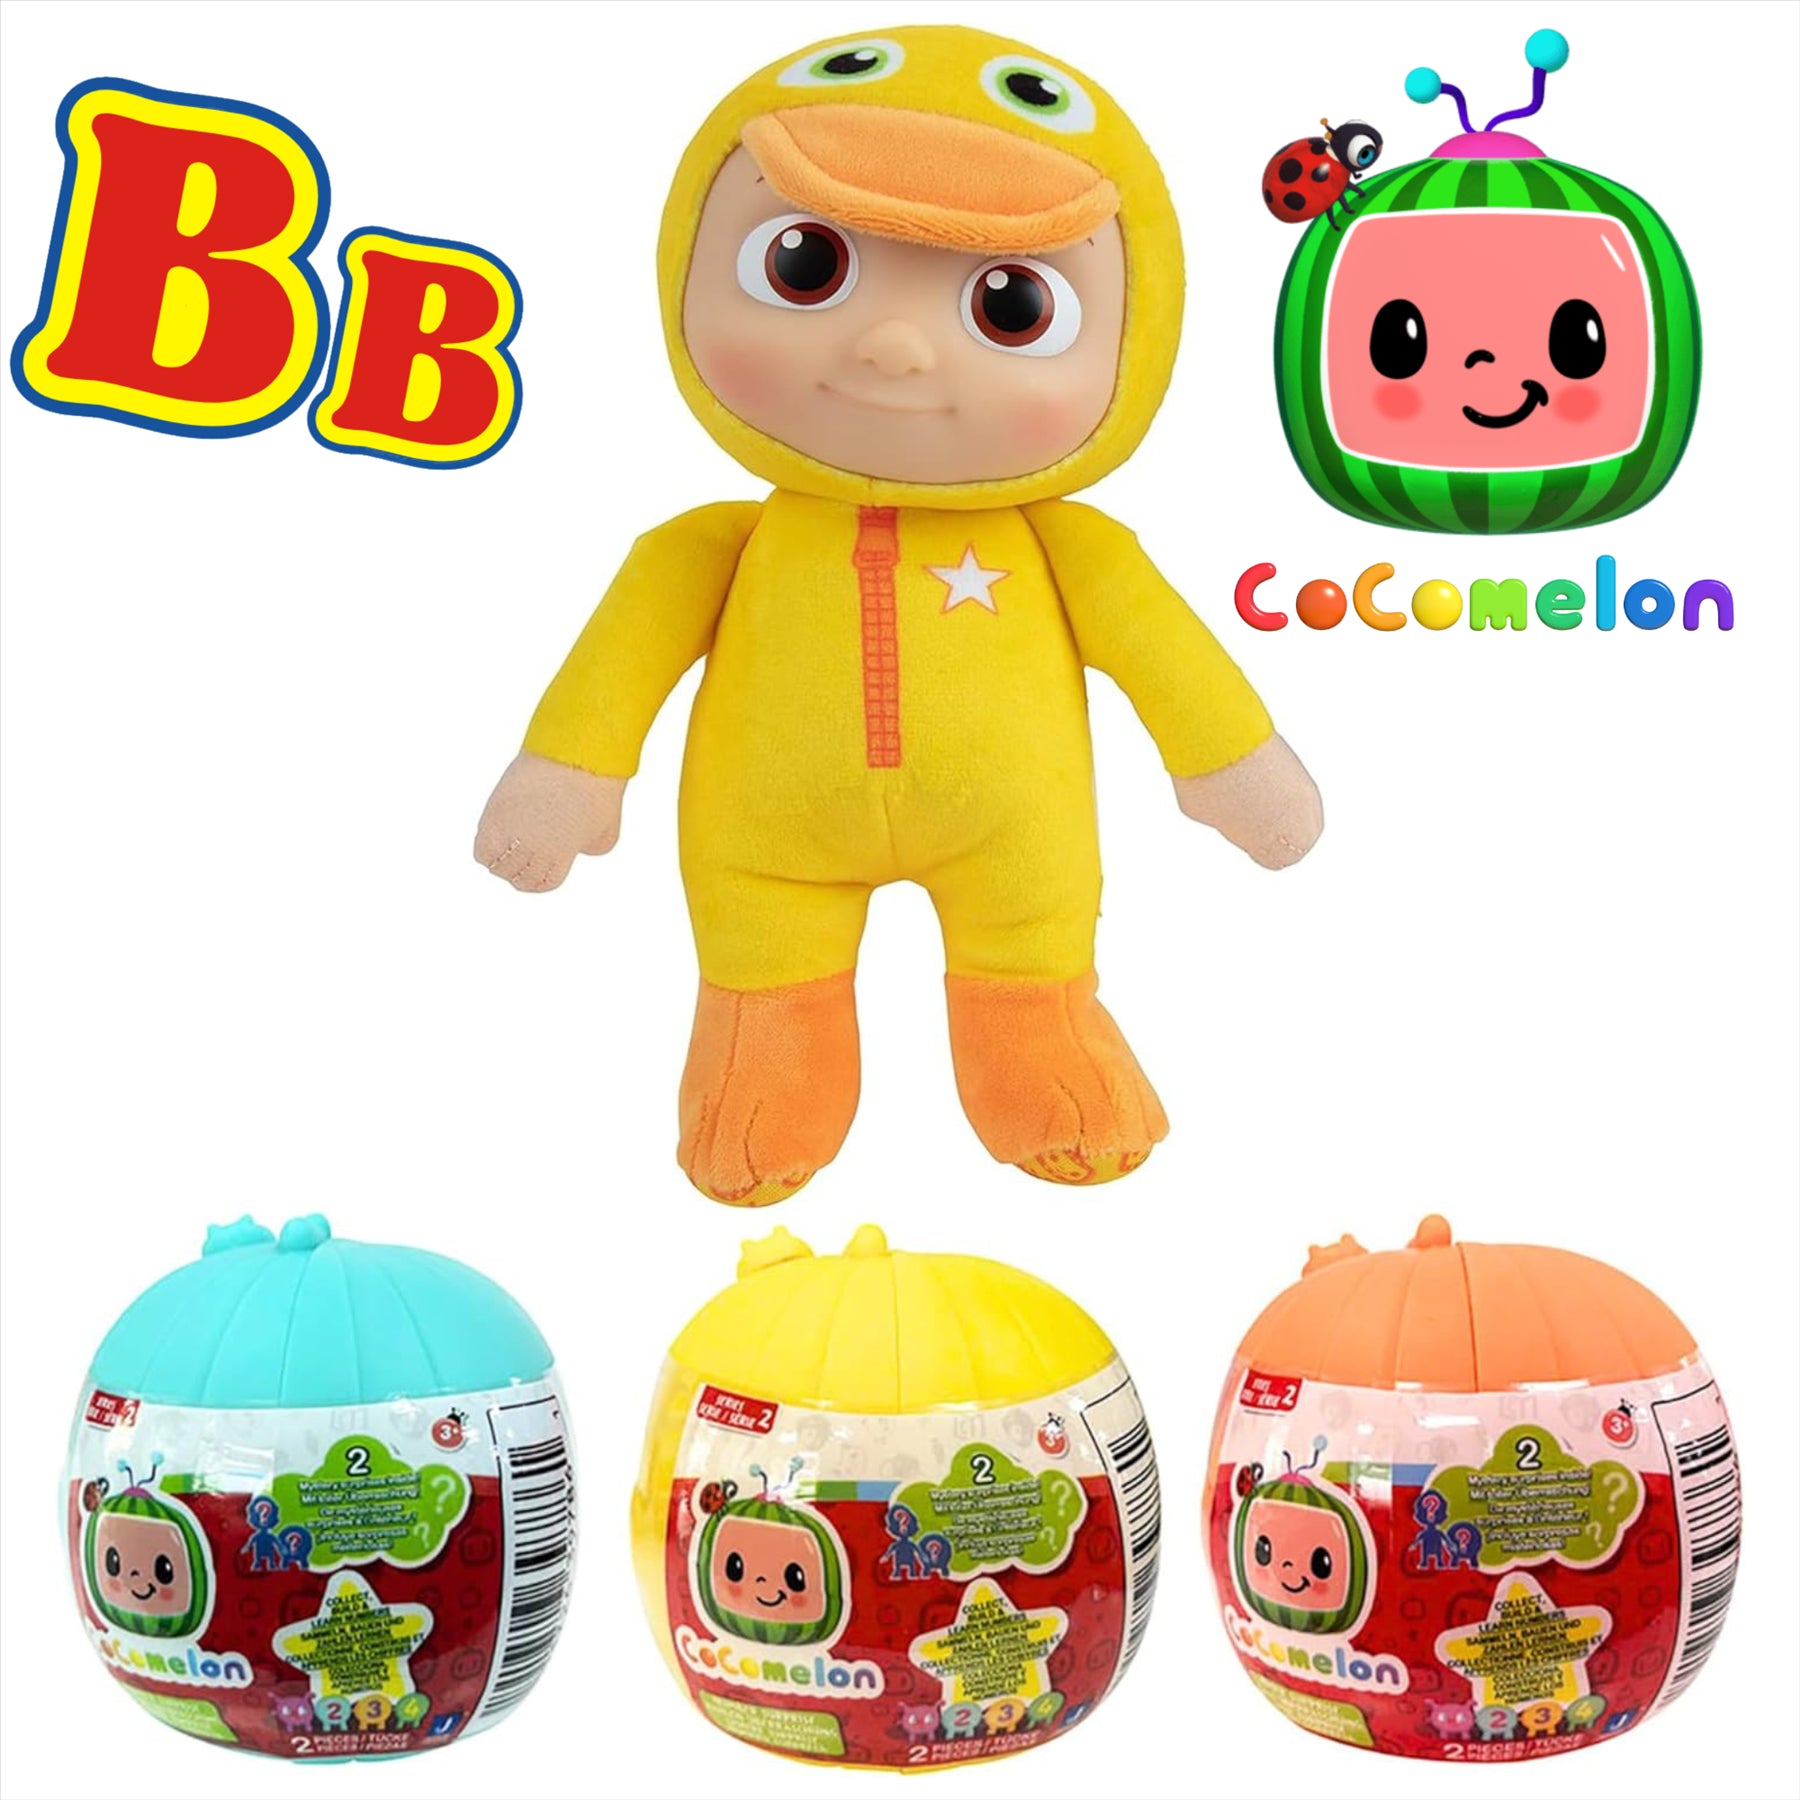 CoComelon Blind Capsule Number Character Articulated Figure Set - Duckie 20cm Plush and 3x Balls - Toptoys2u